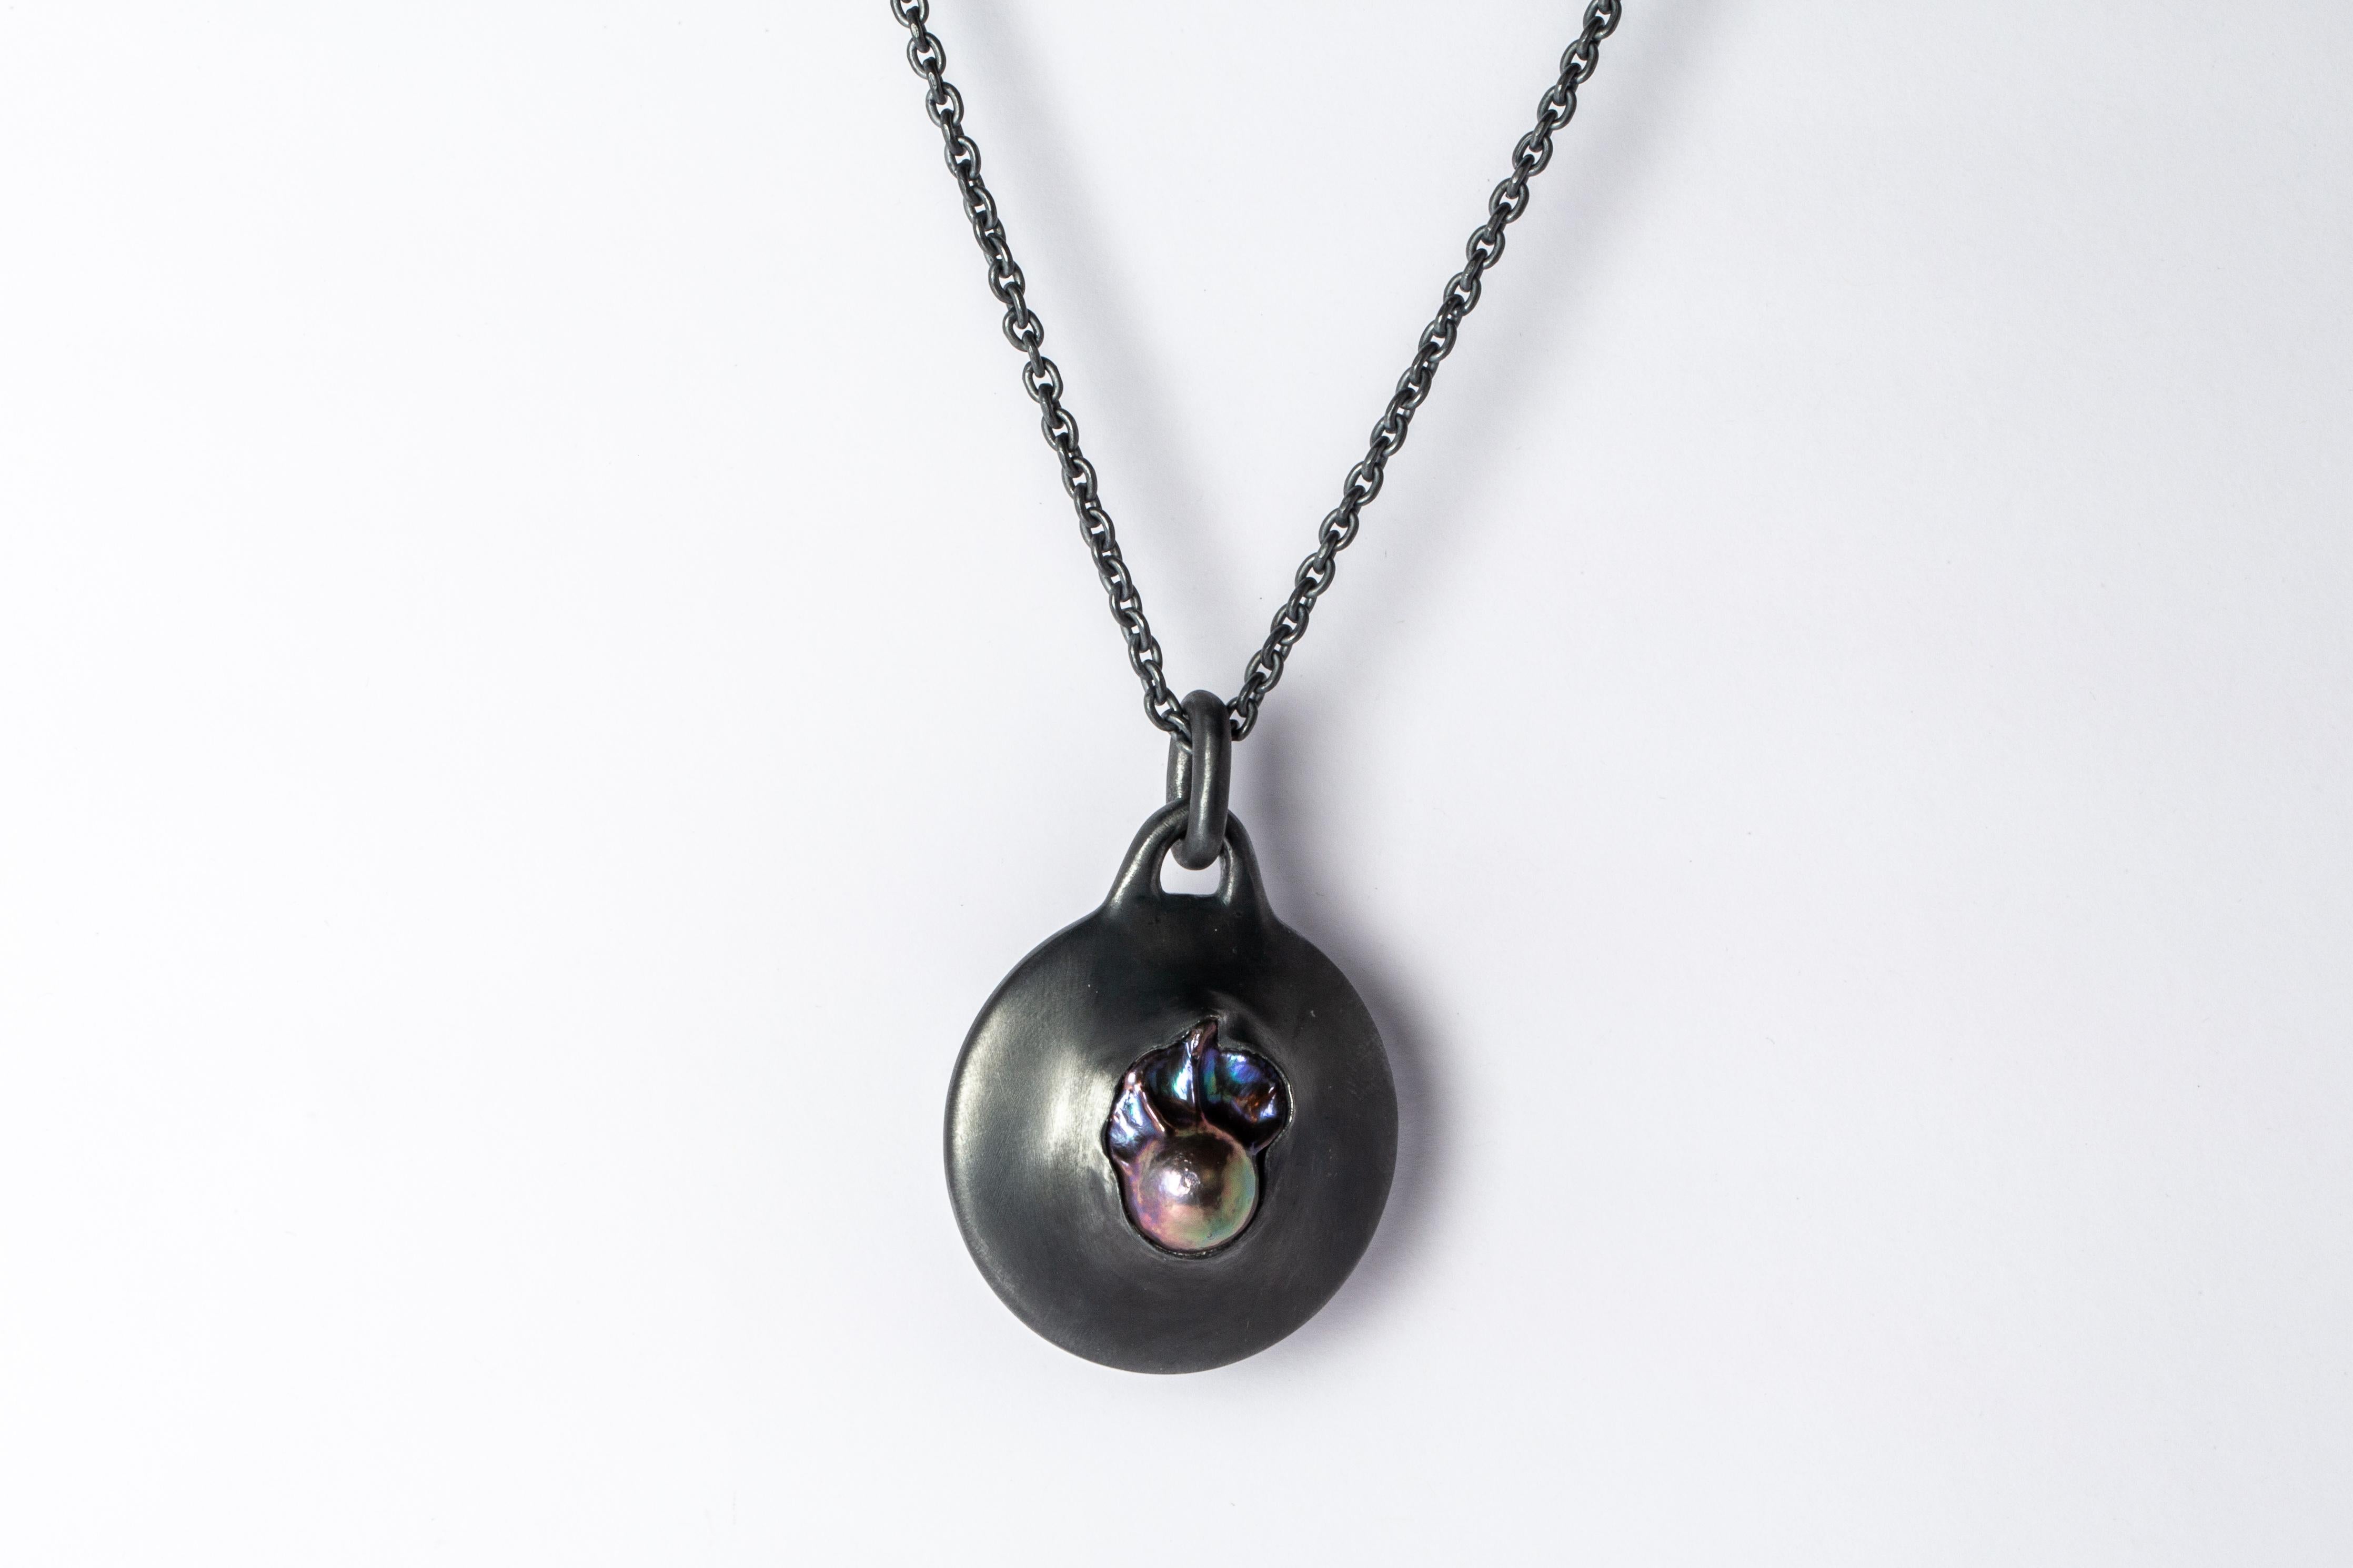 Necklace in the disk shape made in oxidized sterling silver and a bead of black rainbow pearl. This finish may fade over time, which can be considered an enhancement. The Disc family is essentially an Amulet, and they centralize focus onto the